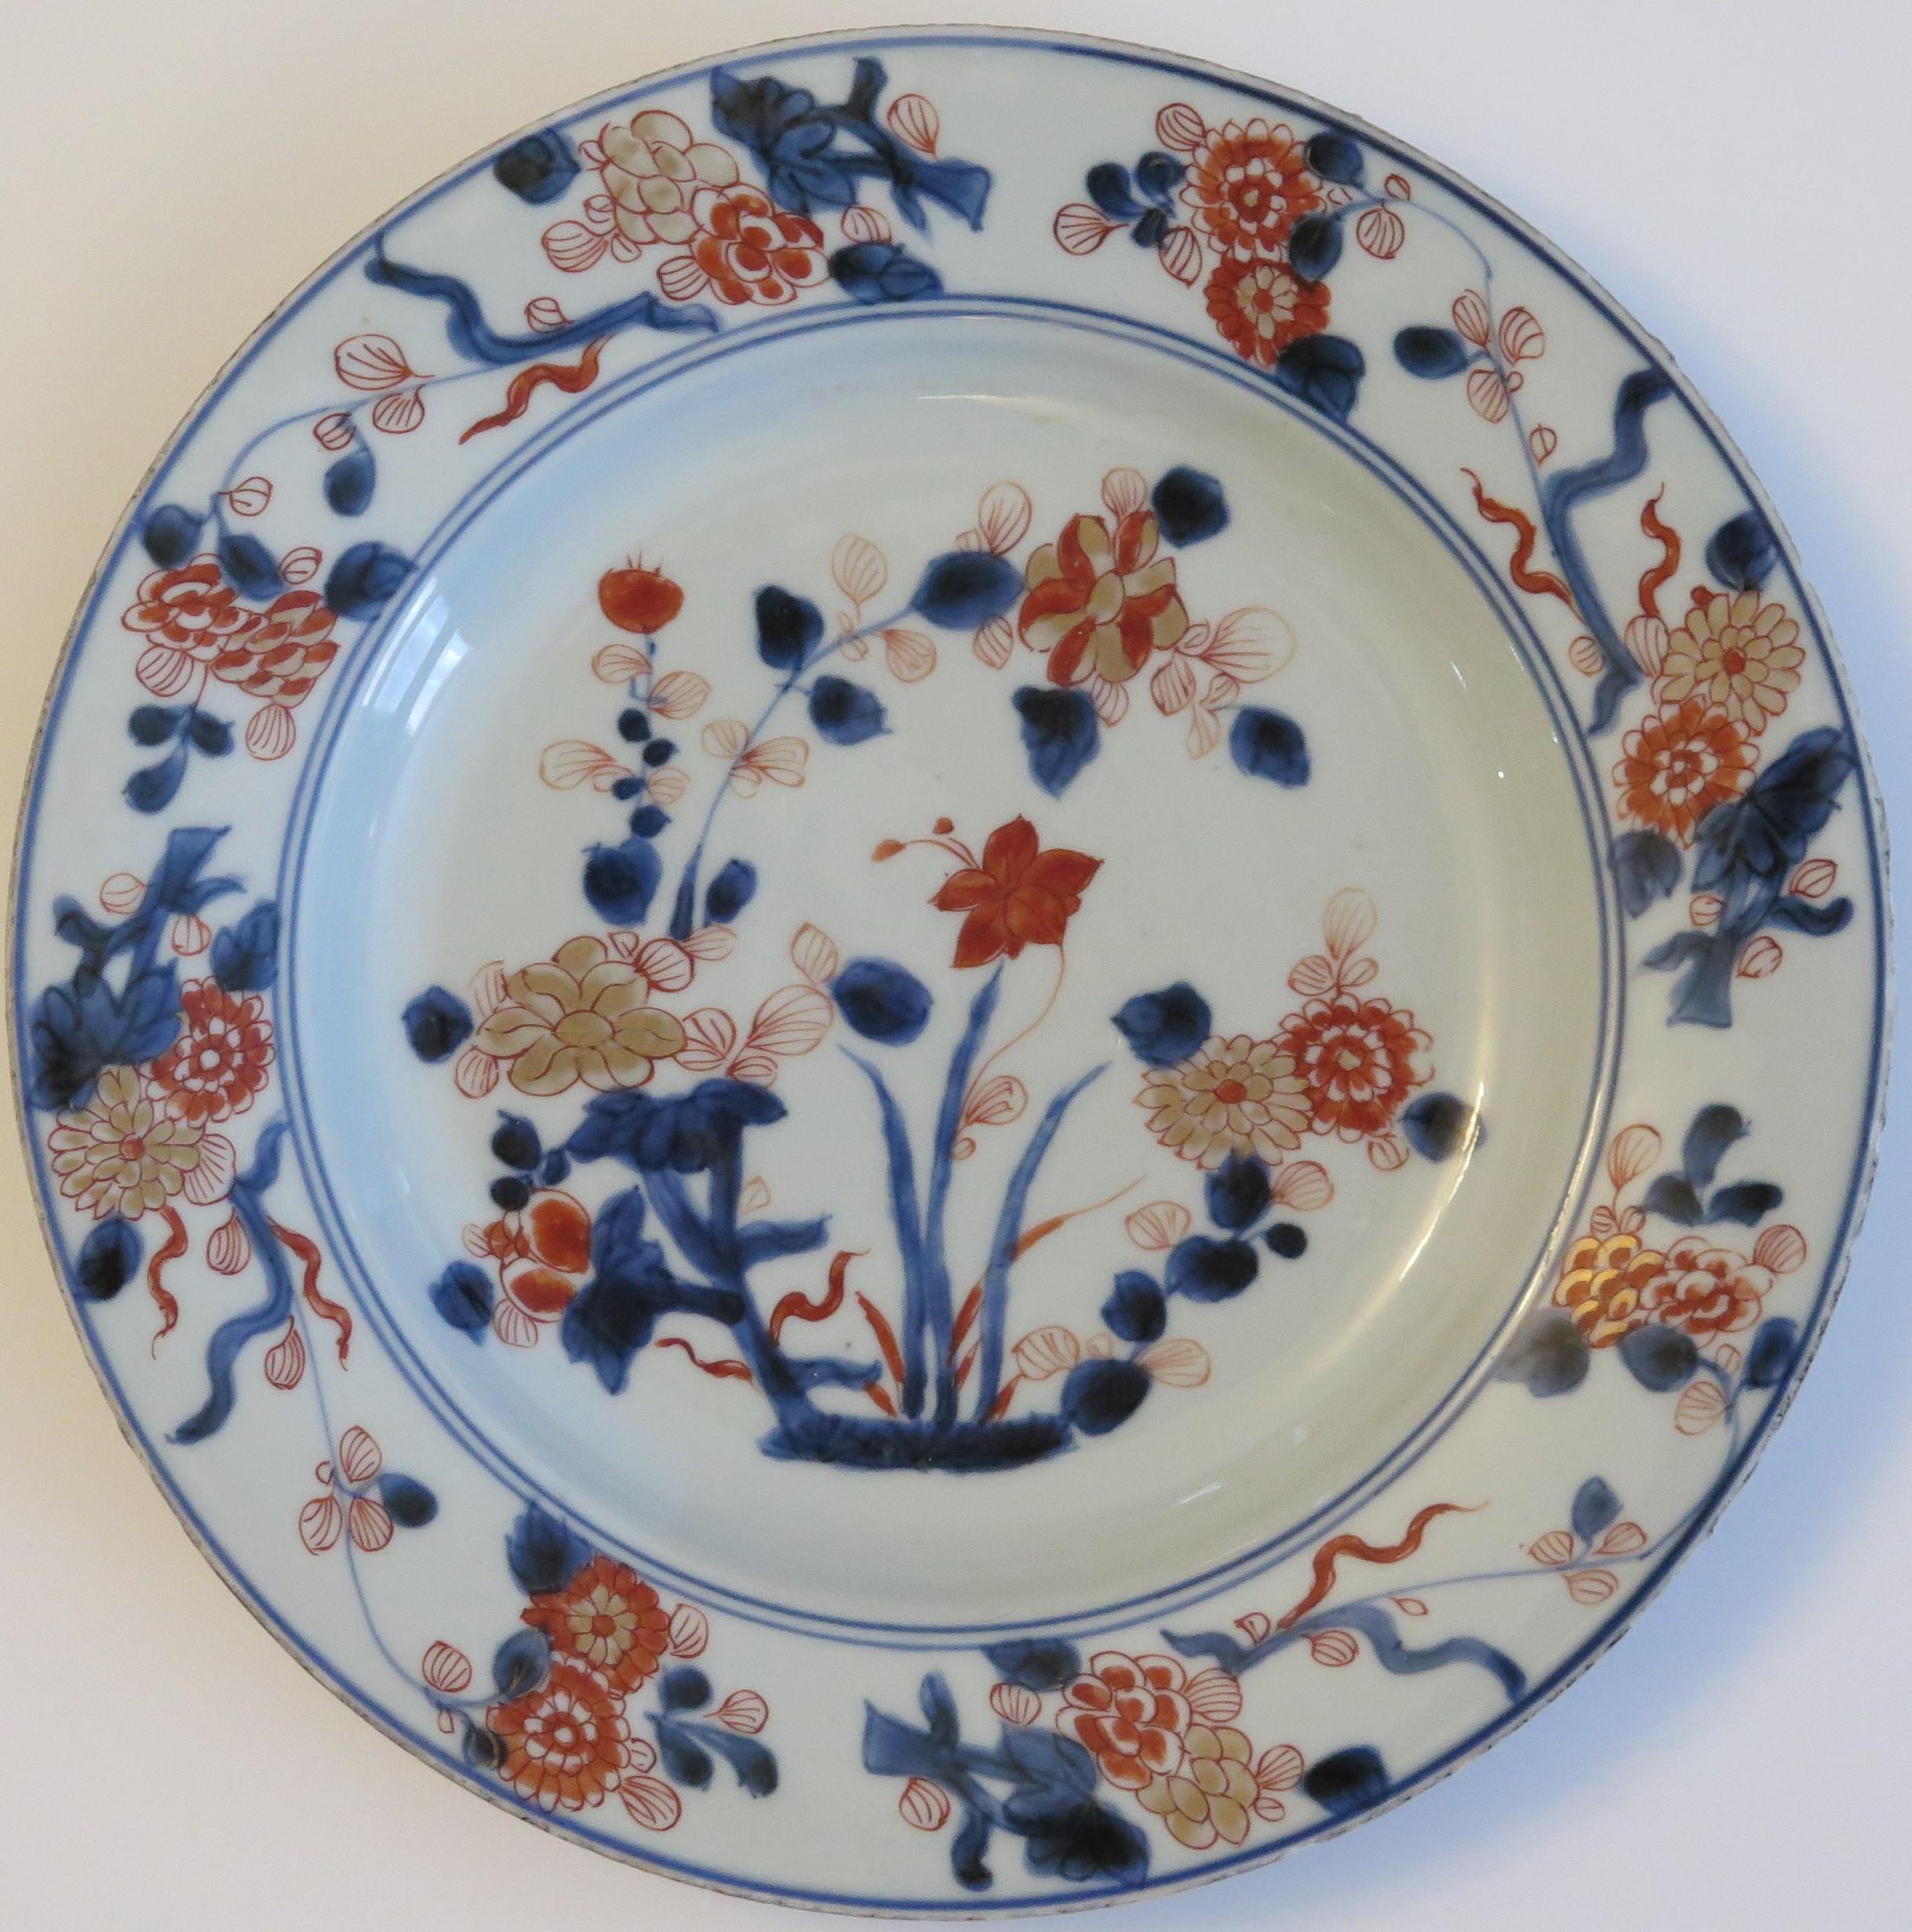 This is a beautifully hand painted Chinese Export porcelain Plate or Bowl from the Qing, Kangxi period, 1662-1722, fully marked to the base with the Kangxi period Artemisia Leaf mark within a double blue ring.

The plate is of dinner plate size,